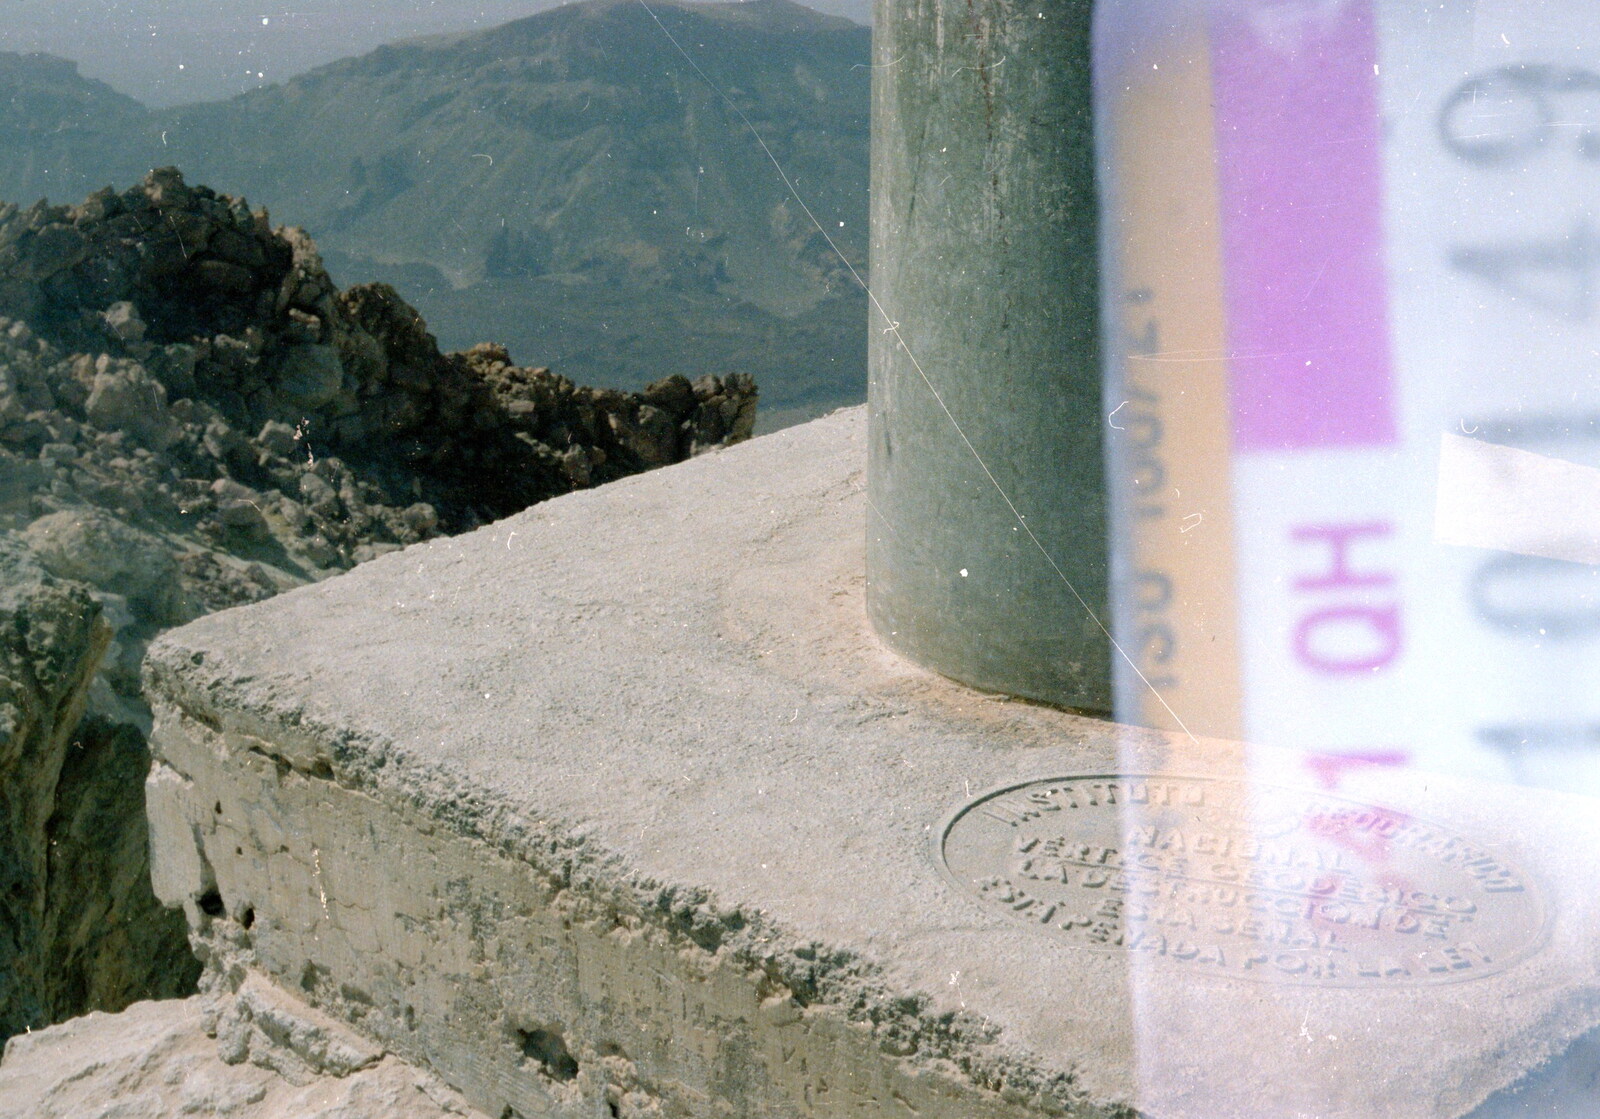 The trig point at the very top of the mountain from A Holiday in Los Christianos, Tenerife - 19th June 1985